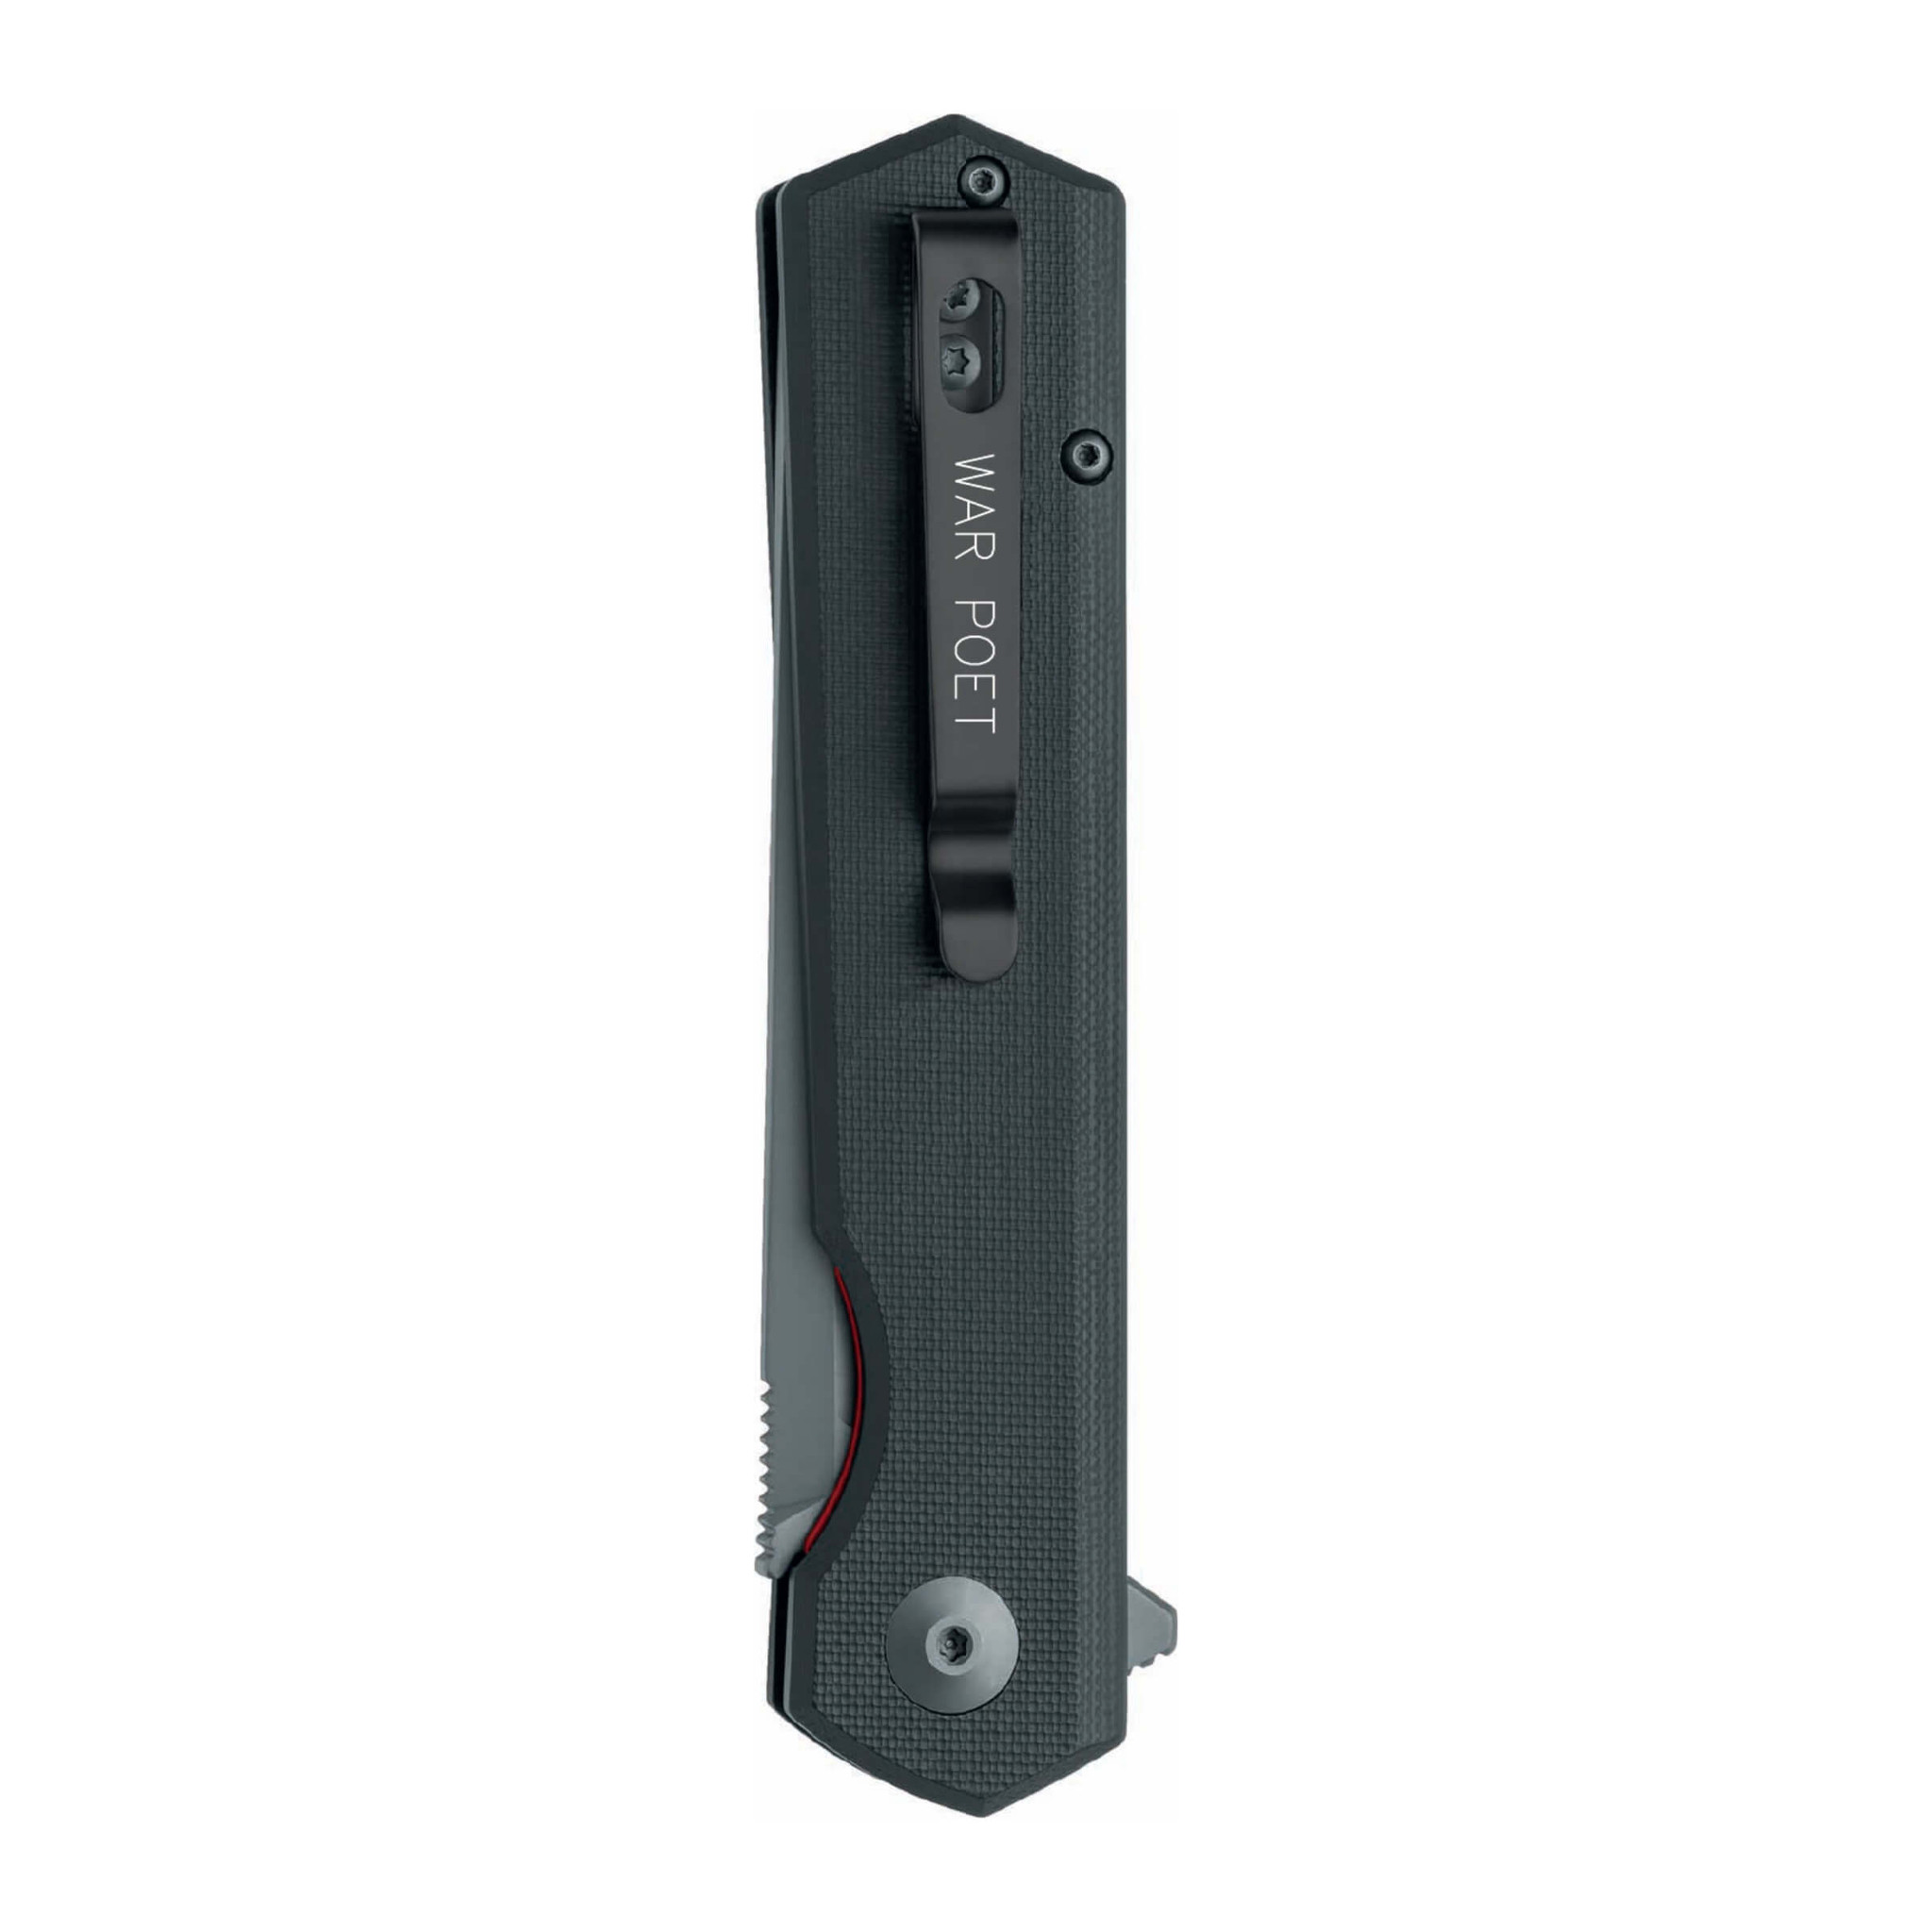 The Nero: Black Lock Folding Knife/Blade With Tip-Up Carry Pocket Clip